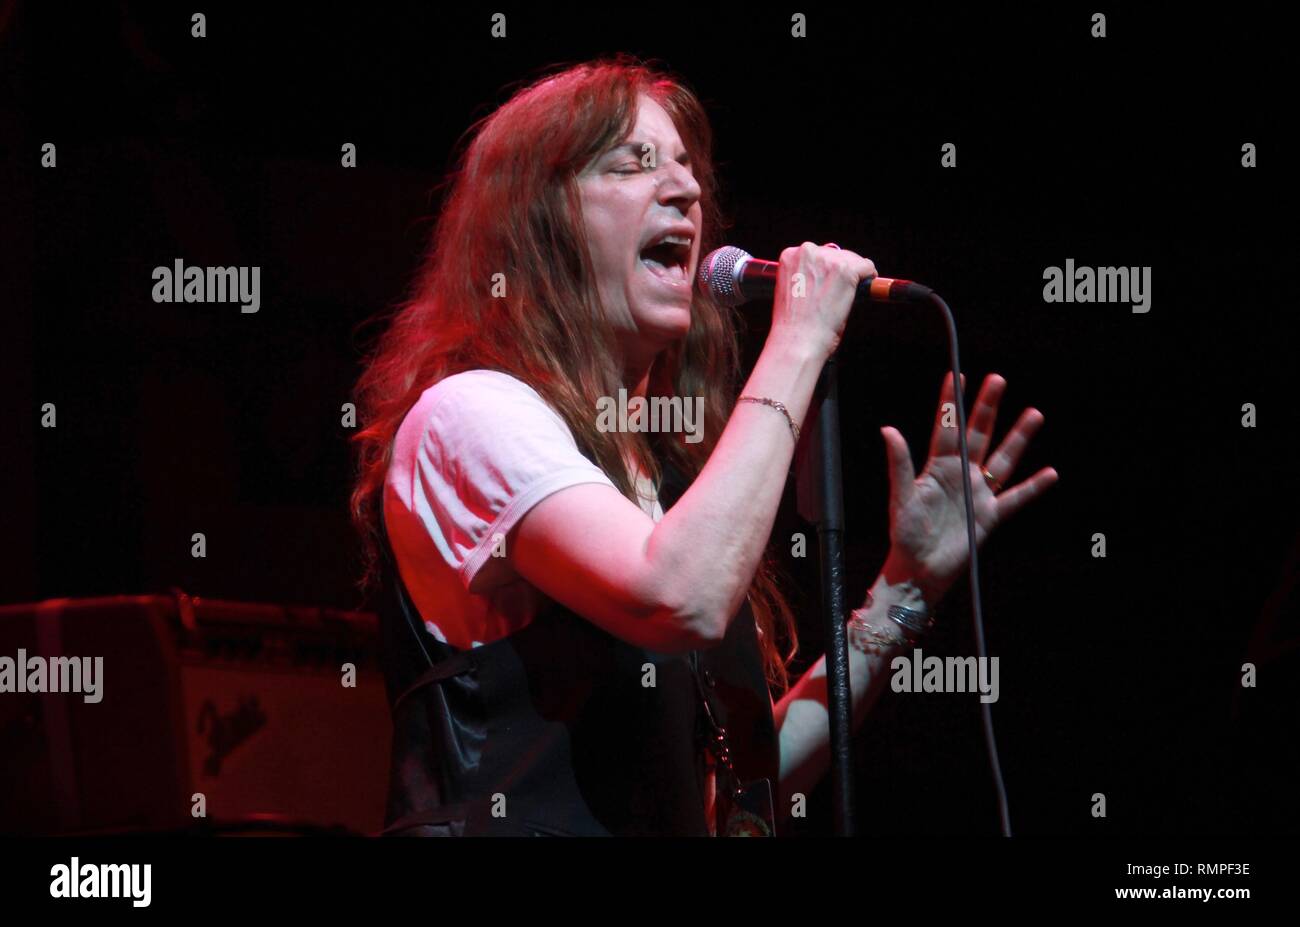 Singer, songwriter, poet and artist Patti Smith is shown performing on stage during a 'live' concert appearance. Stock Photo